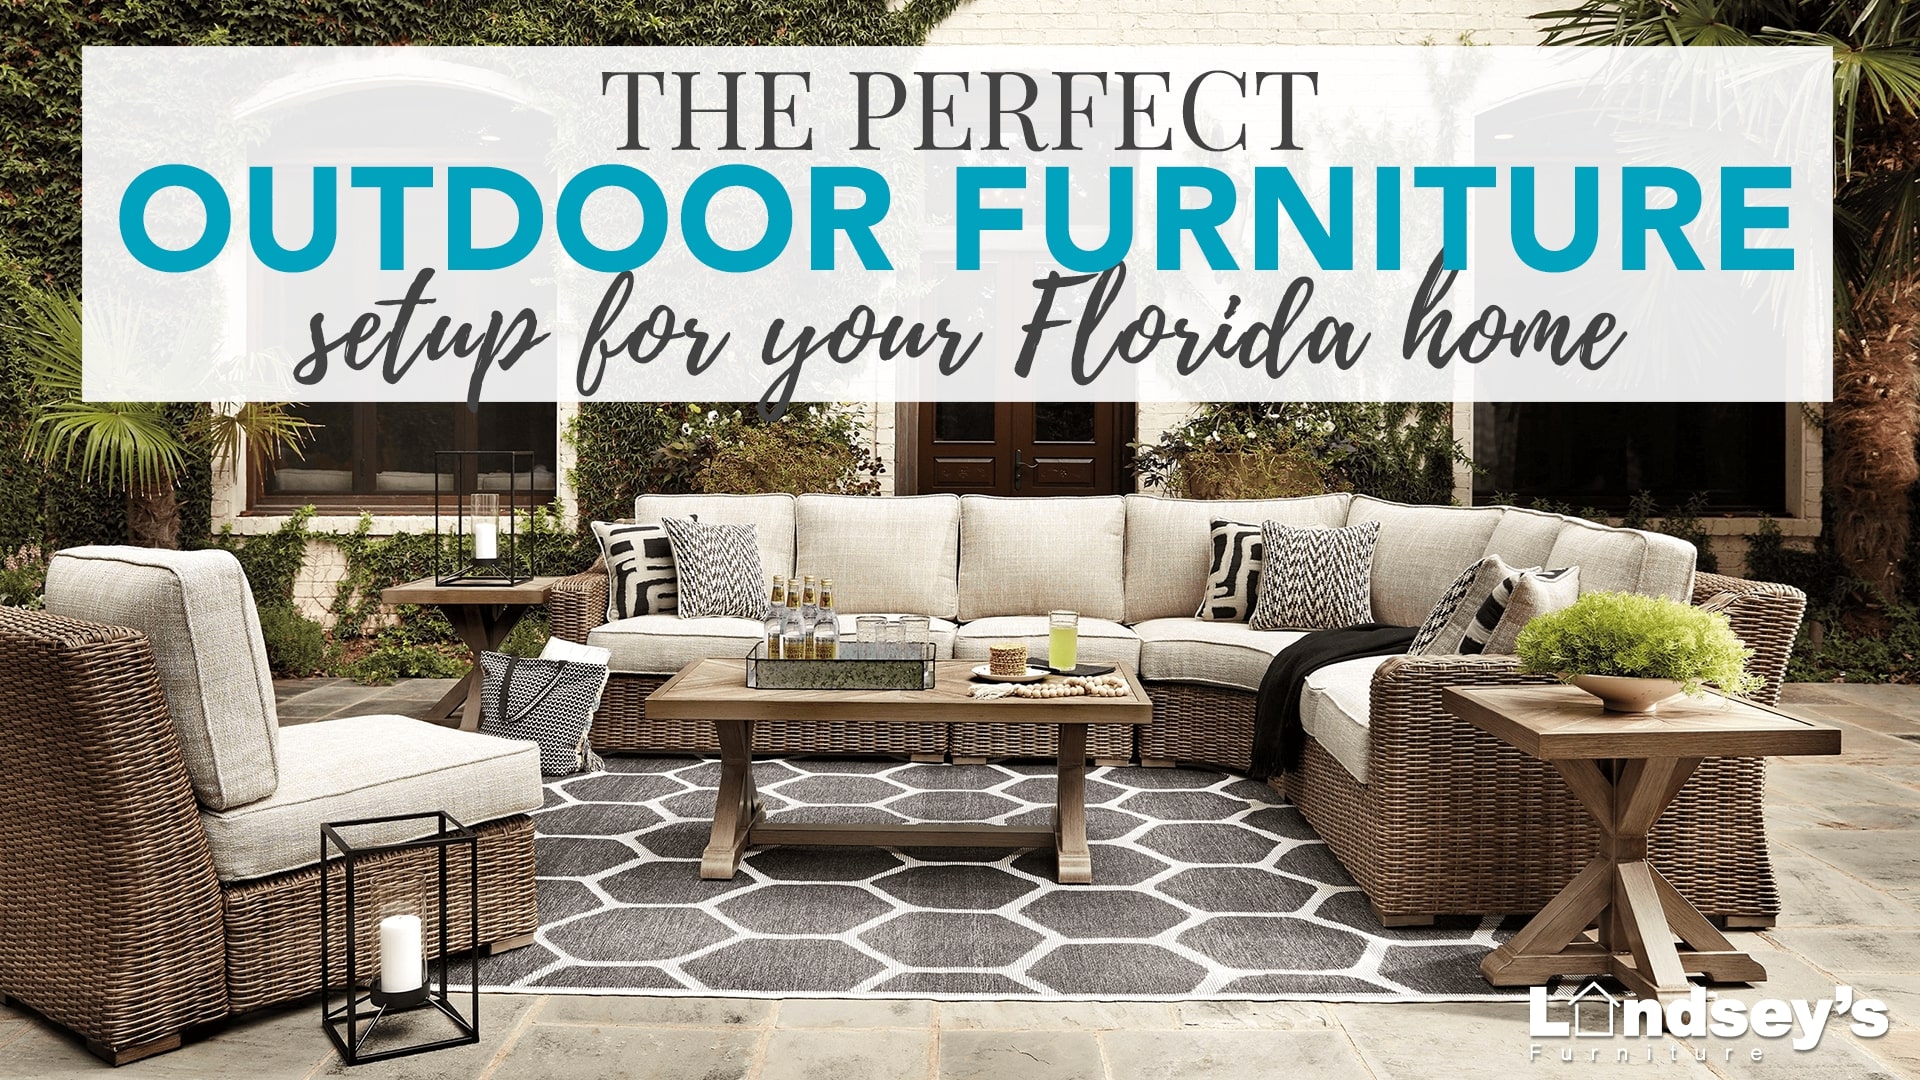 The Perfect Outdoor Furniture Setup for your Florida Home